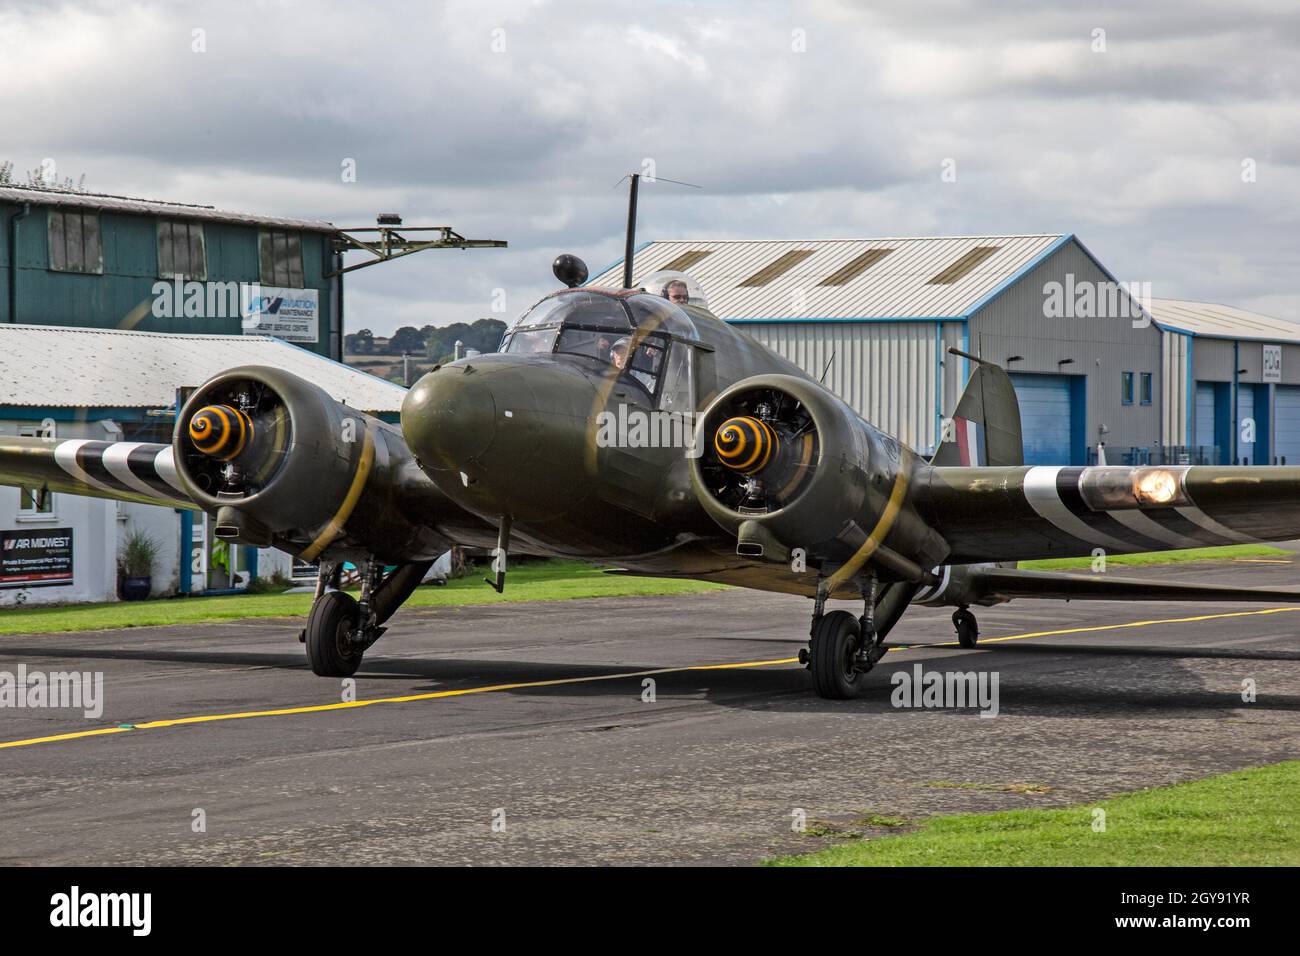 A 1950 Avro Anson Military Trainer Aeroplane, WD143 G-VROE, painted in RAF Colours at Halfpenny Green Wolverhampton Airport, England. Stock Photo